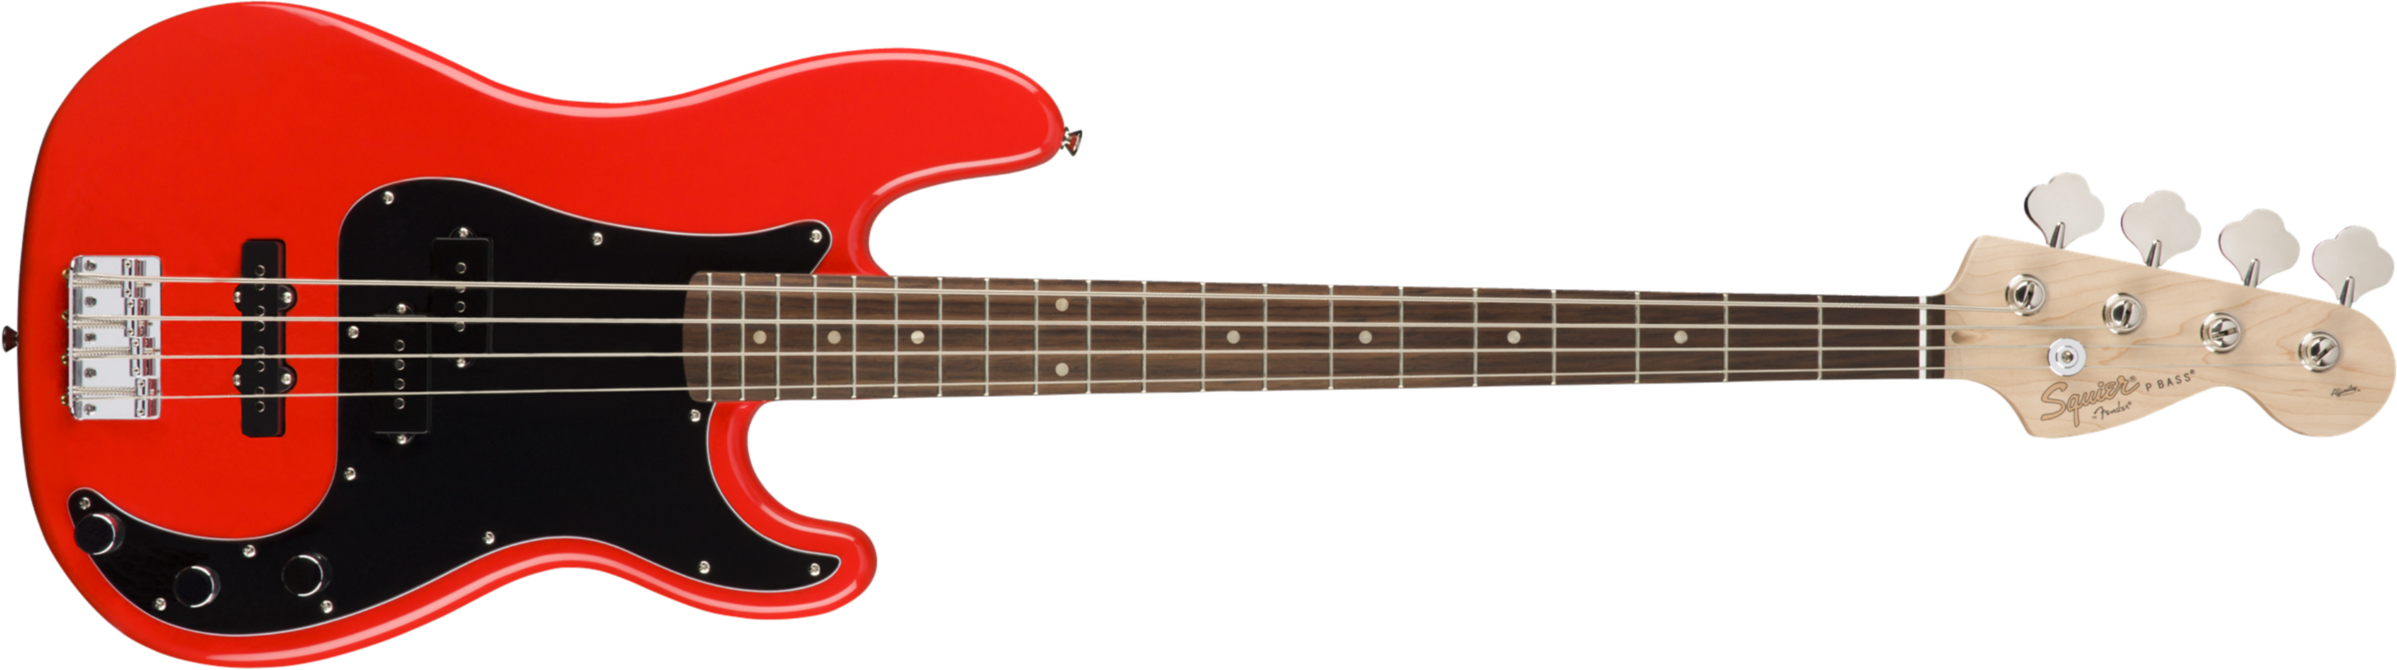 Squier Precision Bass Affinity Series Pj (lau) - Race Red - Solidbody E-bass - Main picture